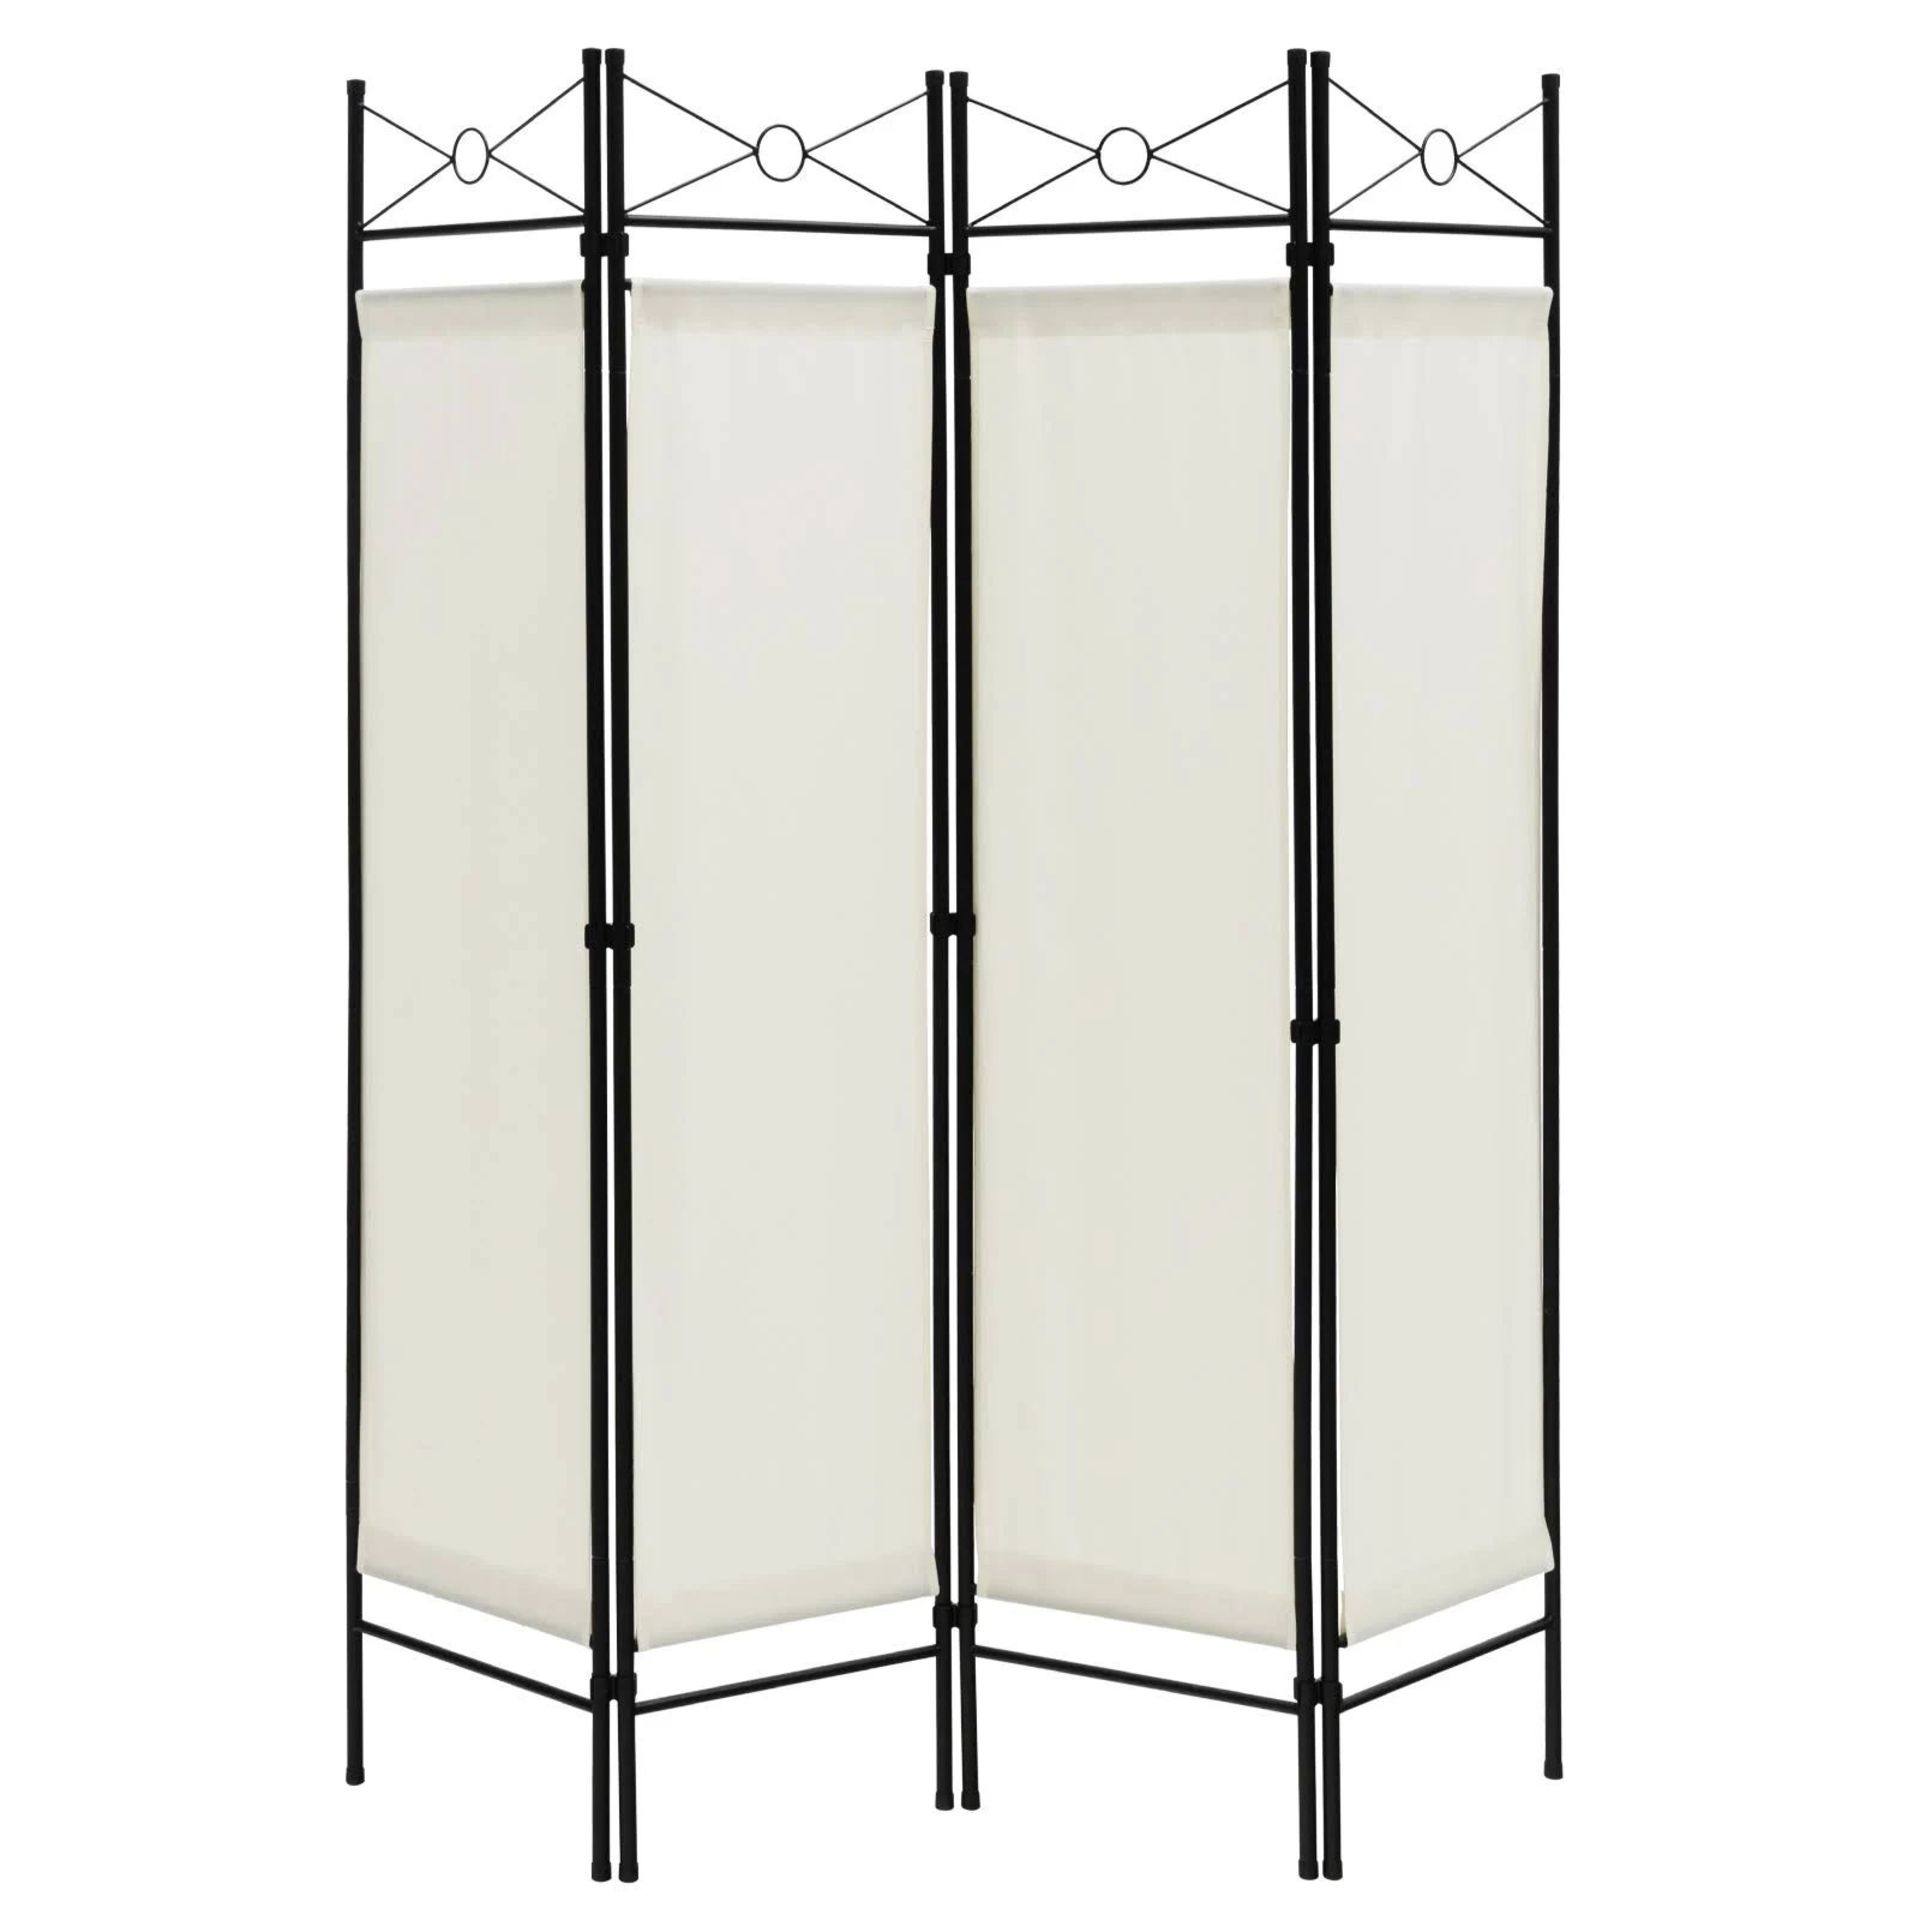 Luxury 6 Feet 4-Panel Folding Freestanding Room Divider. -R14.6. Create a privacy space anytime,